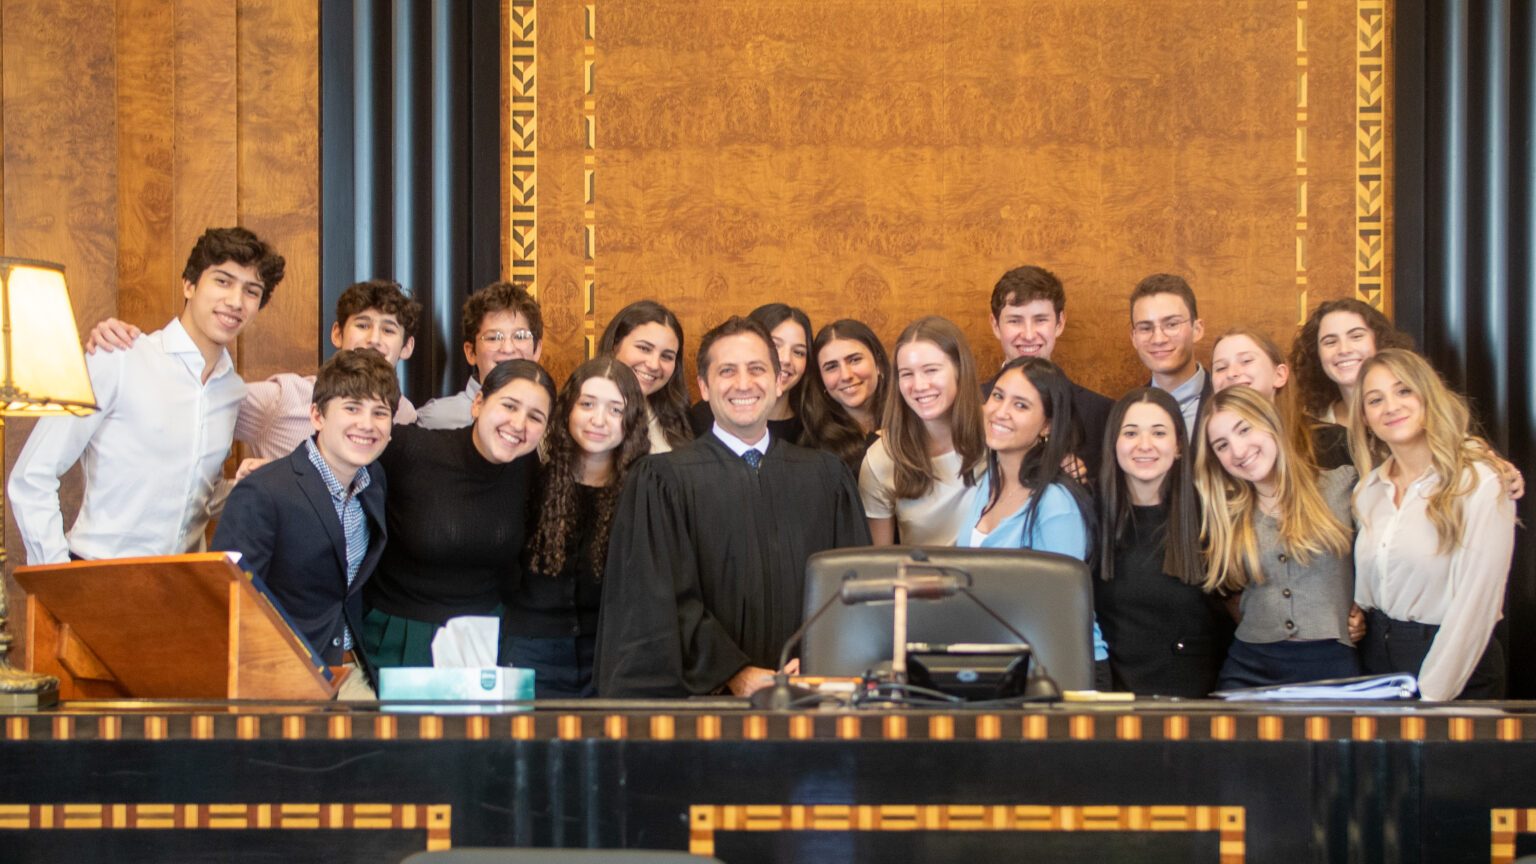 NYS Mock Trial New York State Bar Association